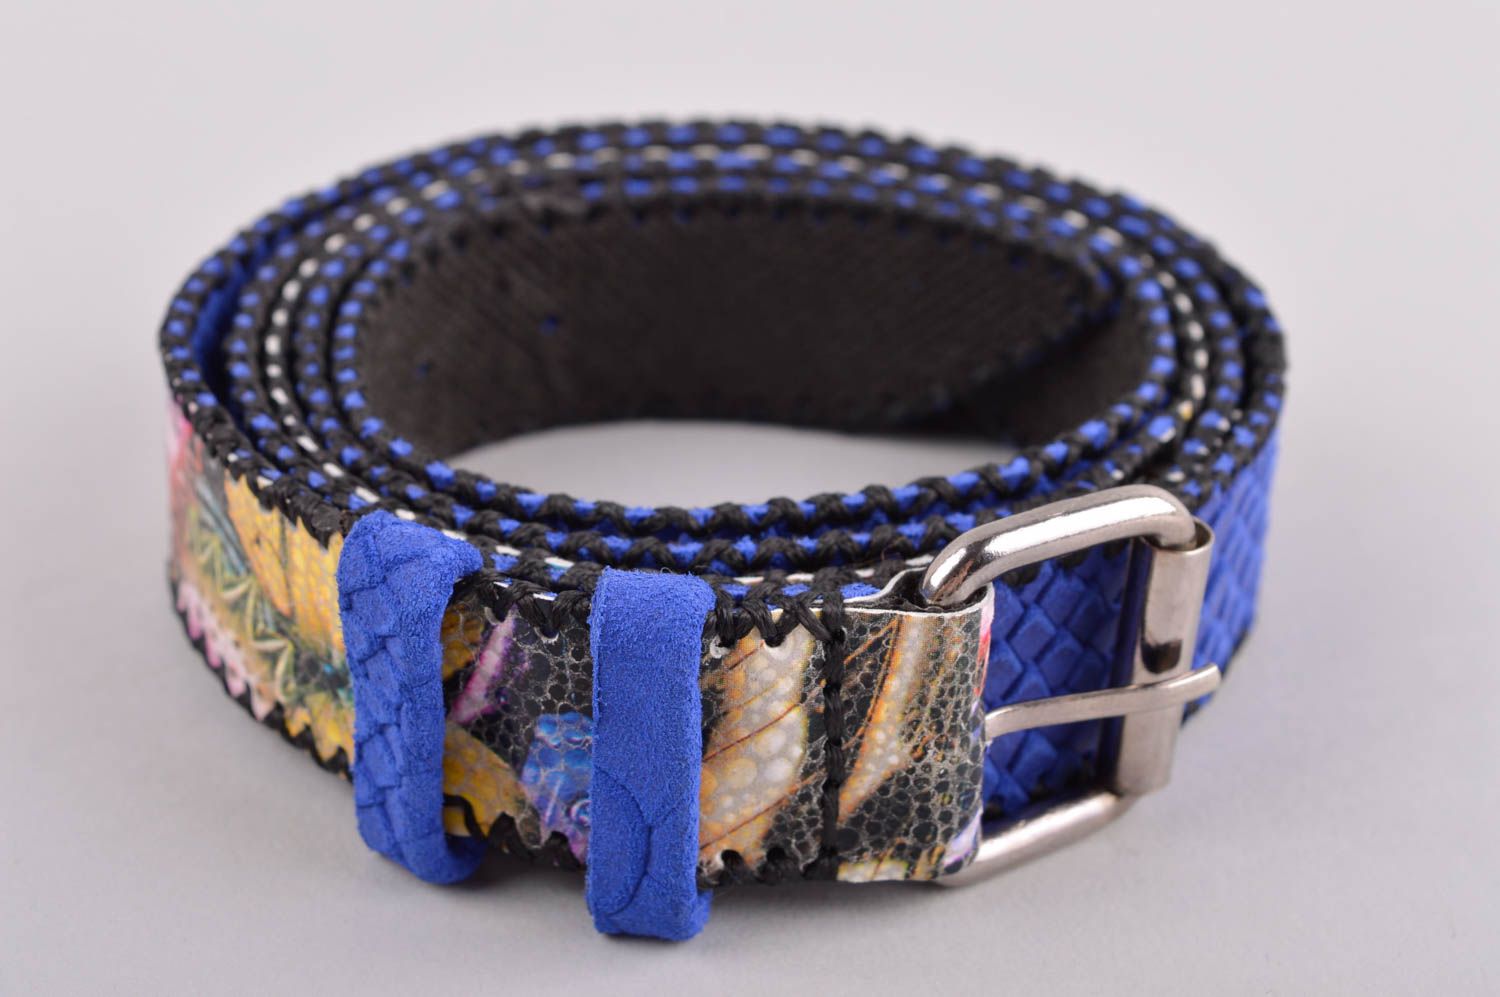 Stylish handmade leather belt leather goods fashion accessories for girls photo 3